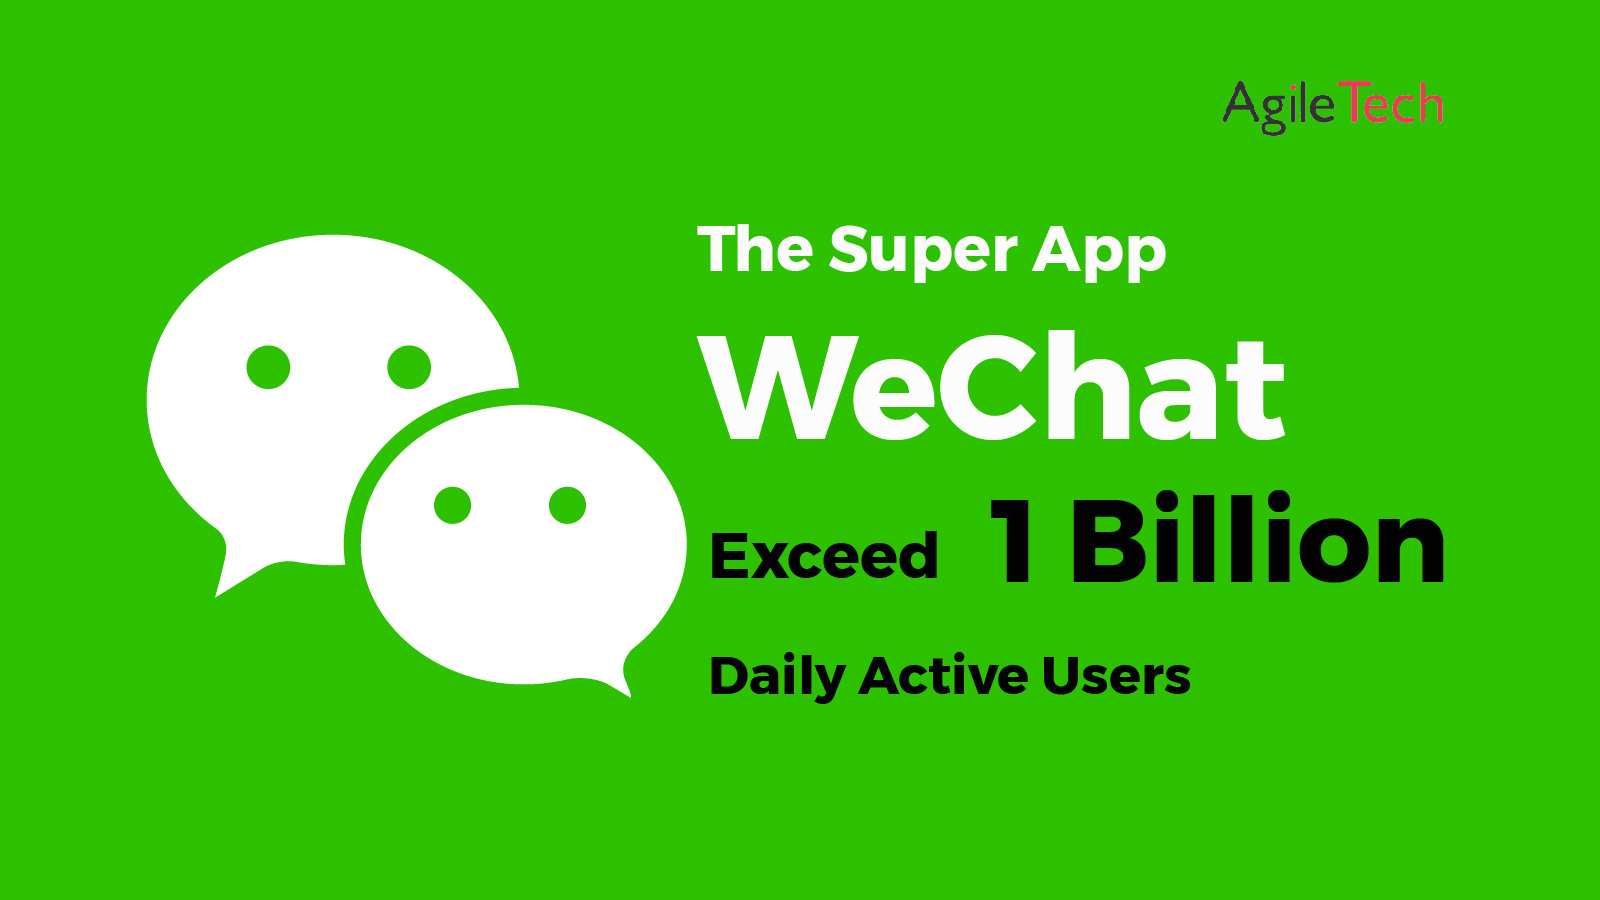 wechat super app exceed 1 billion daily active users